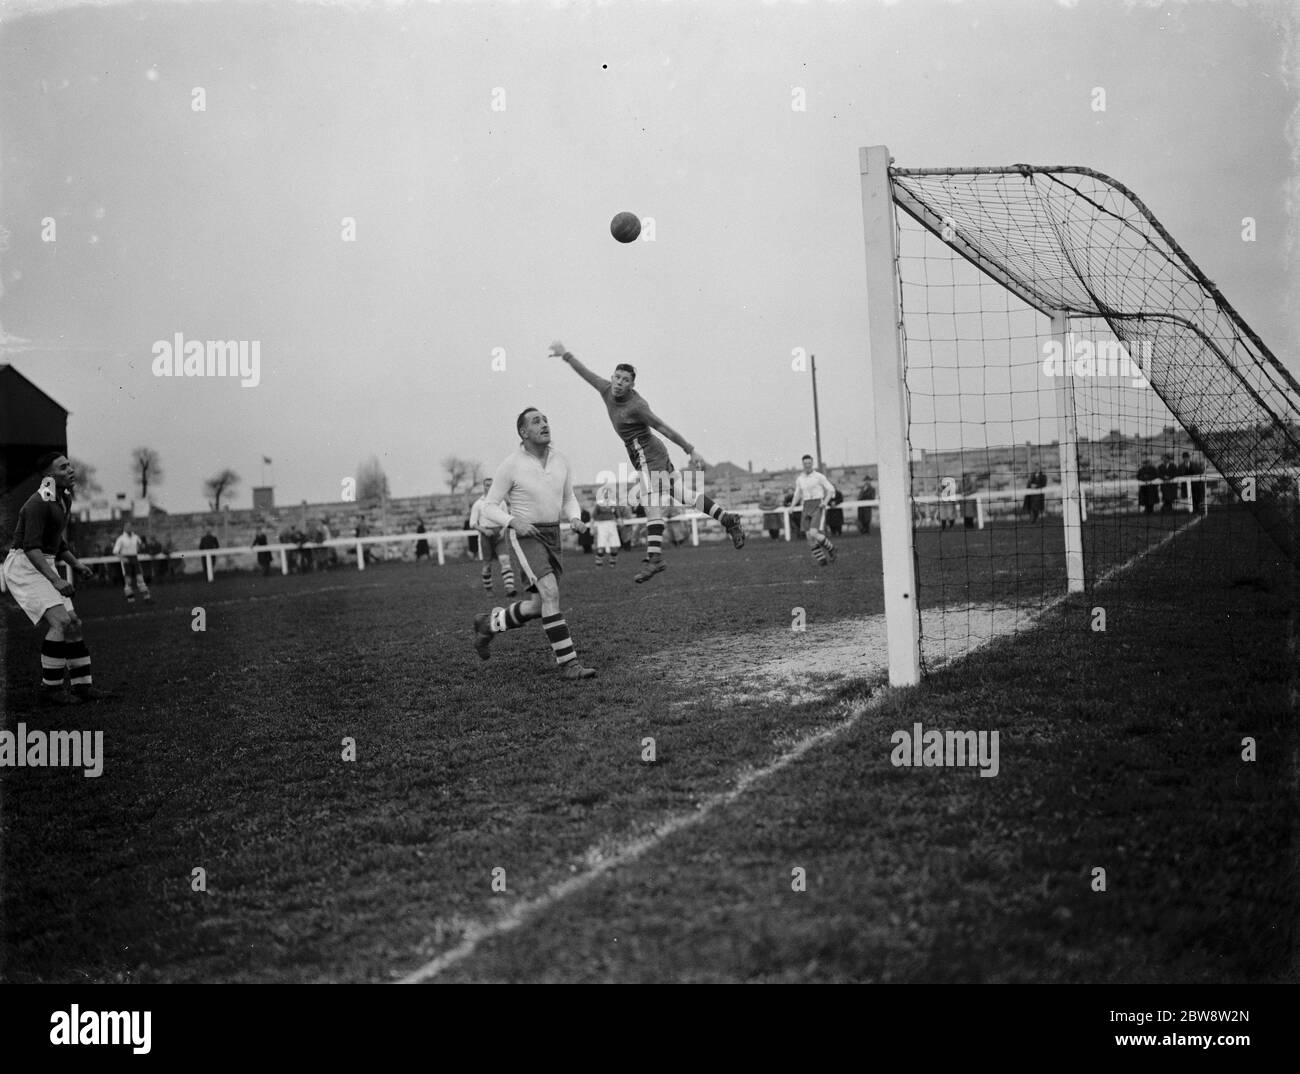 London Paper Mills vs. Finchley - FA Amateur Cup - 05/11/38 The goalkeeper makes a leap for the ball . 1938 Stock Photo